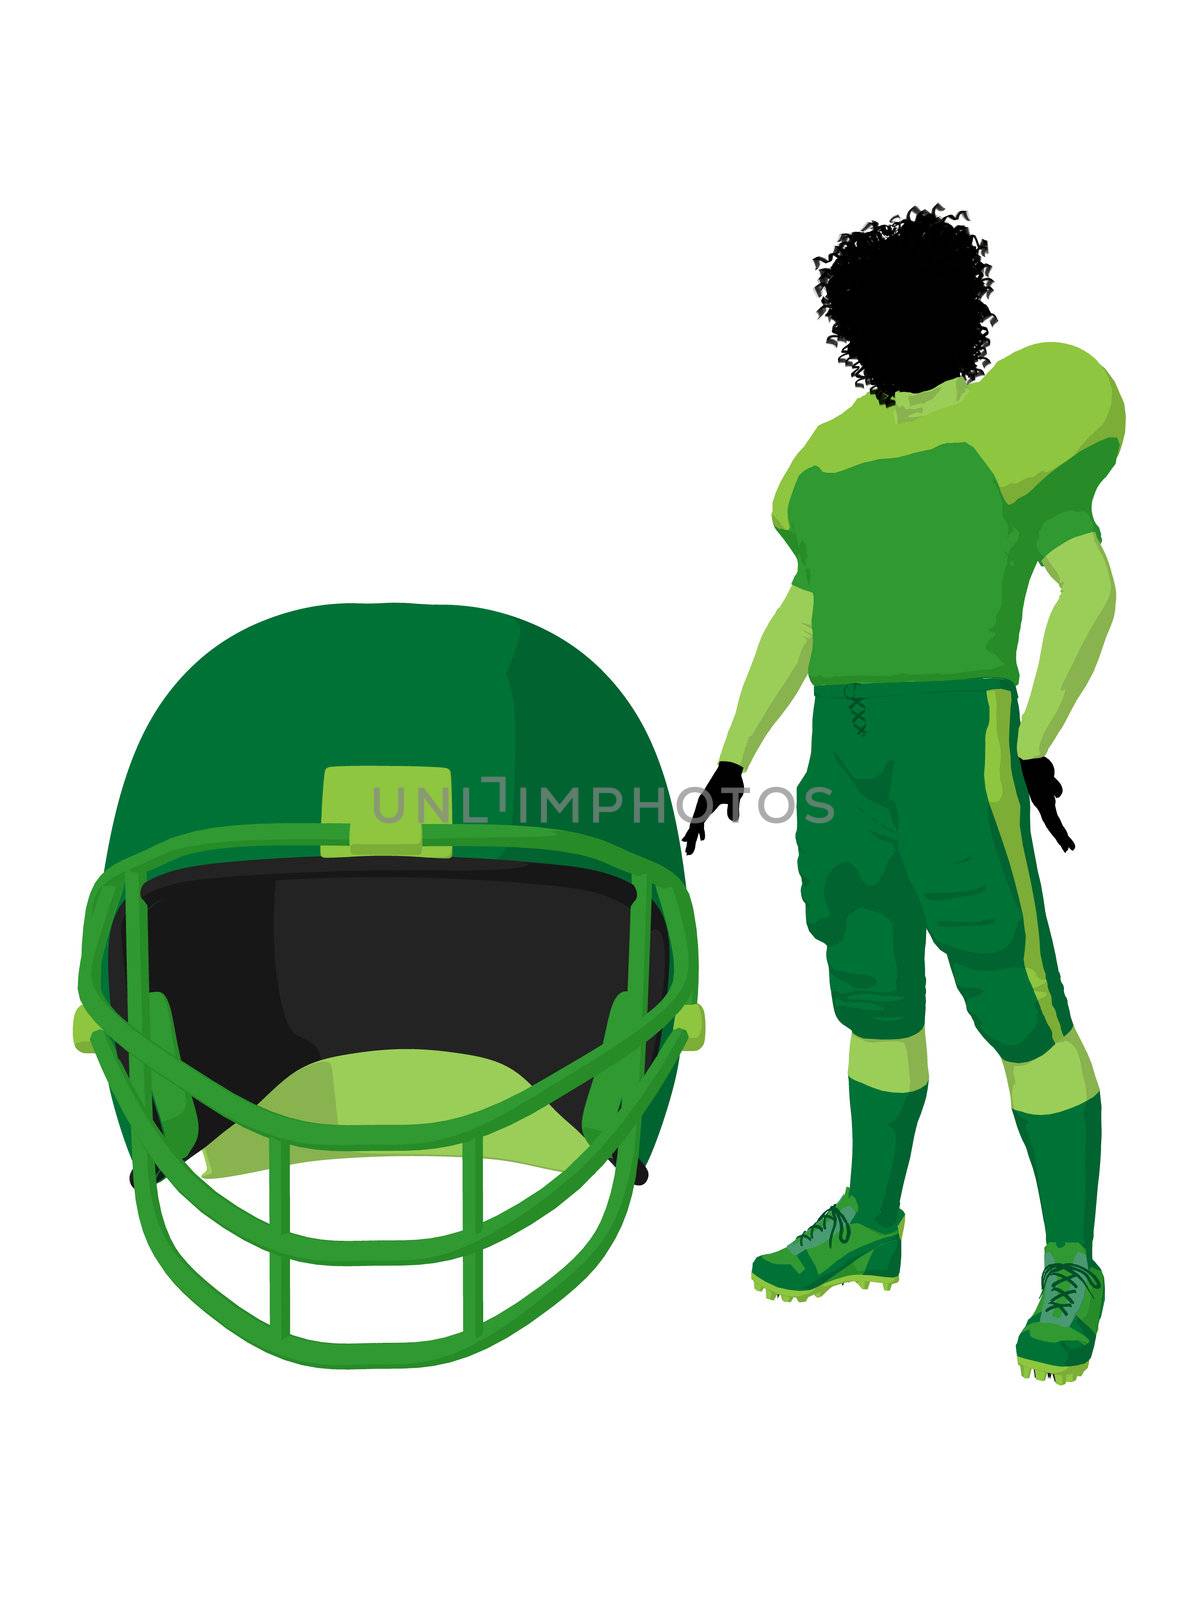 African American Female Football Player Illustration Silhouette by kathygold